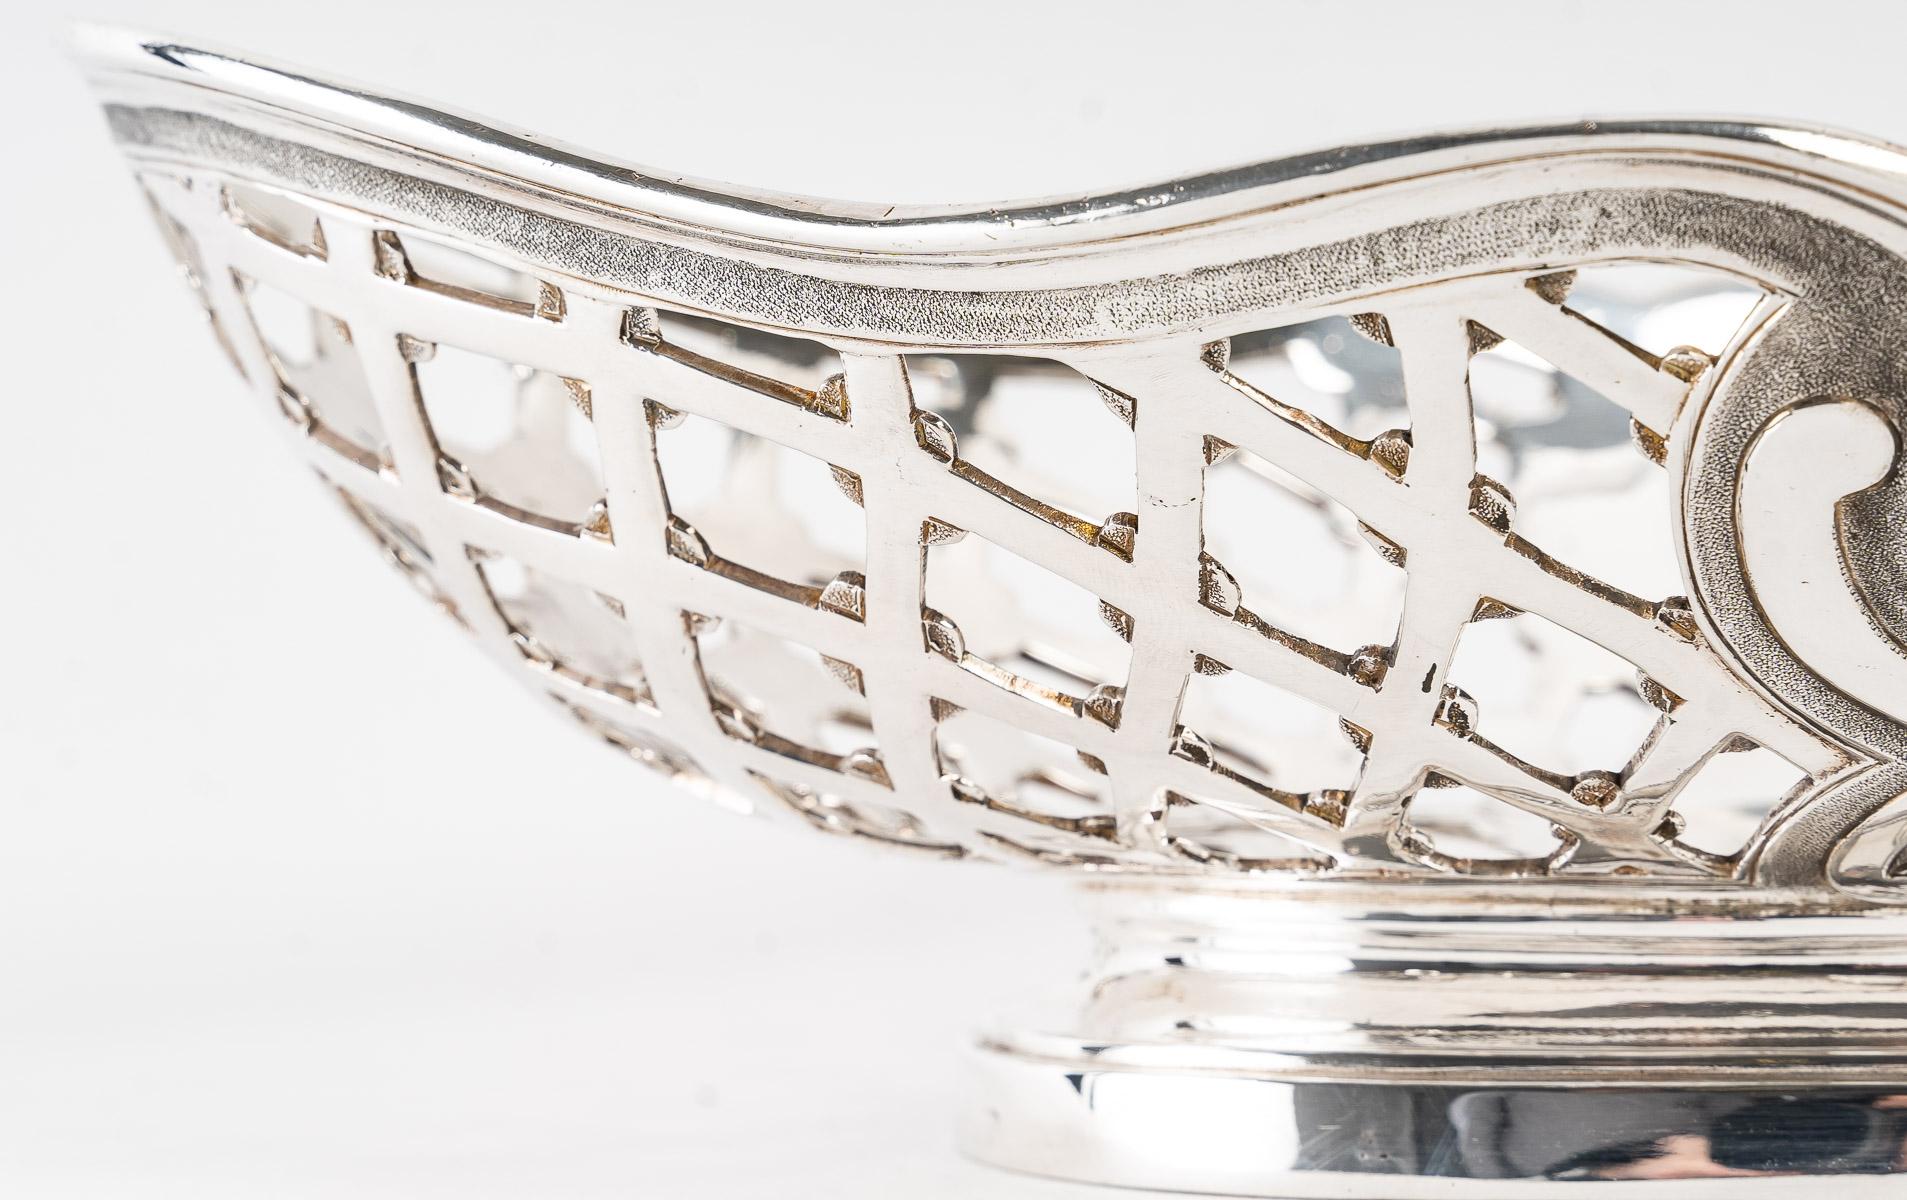 Silversmith Souche Lapparra - Solid Silver Basket Circa 20th Century For Sale 6